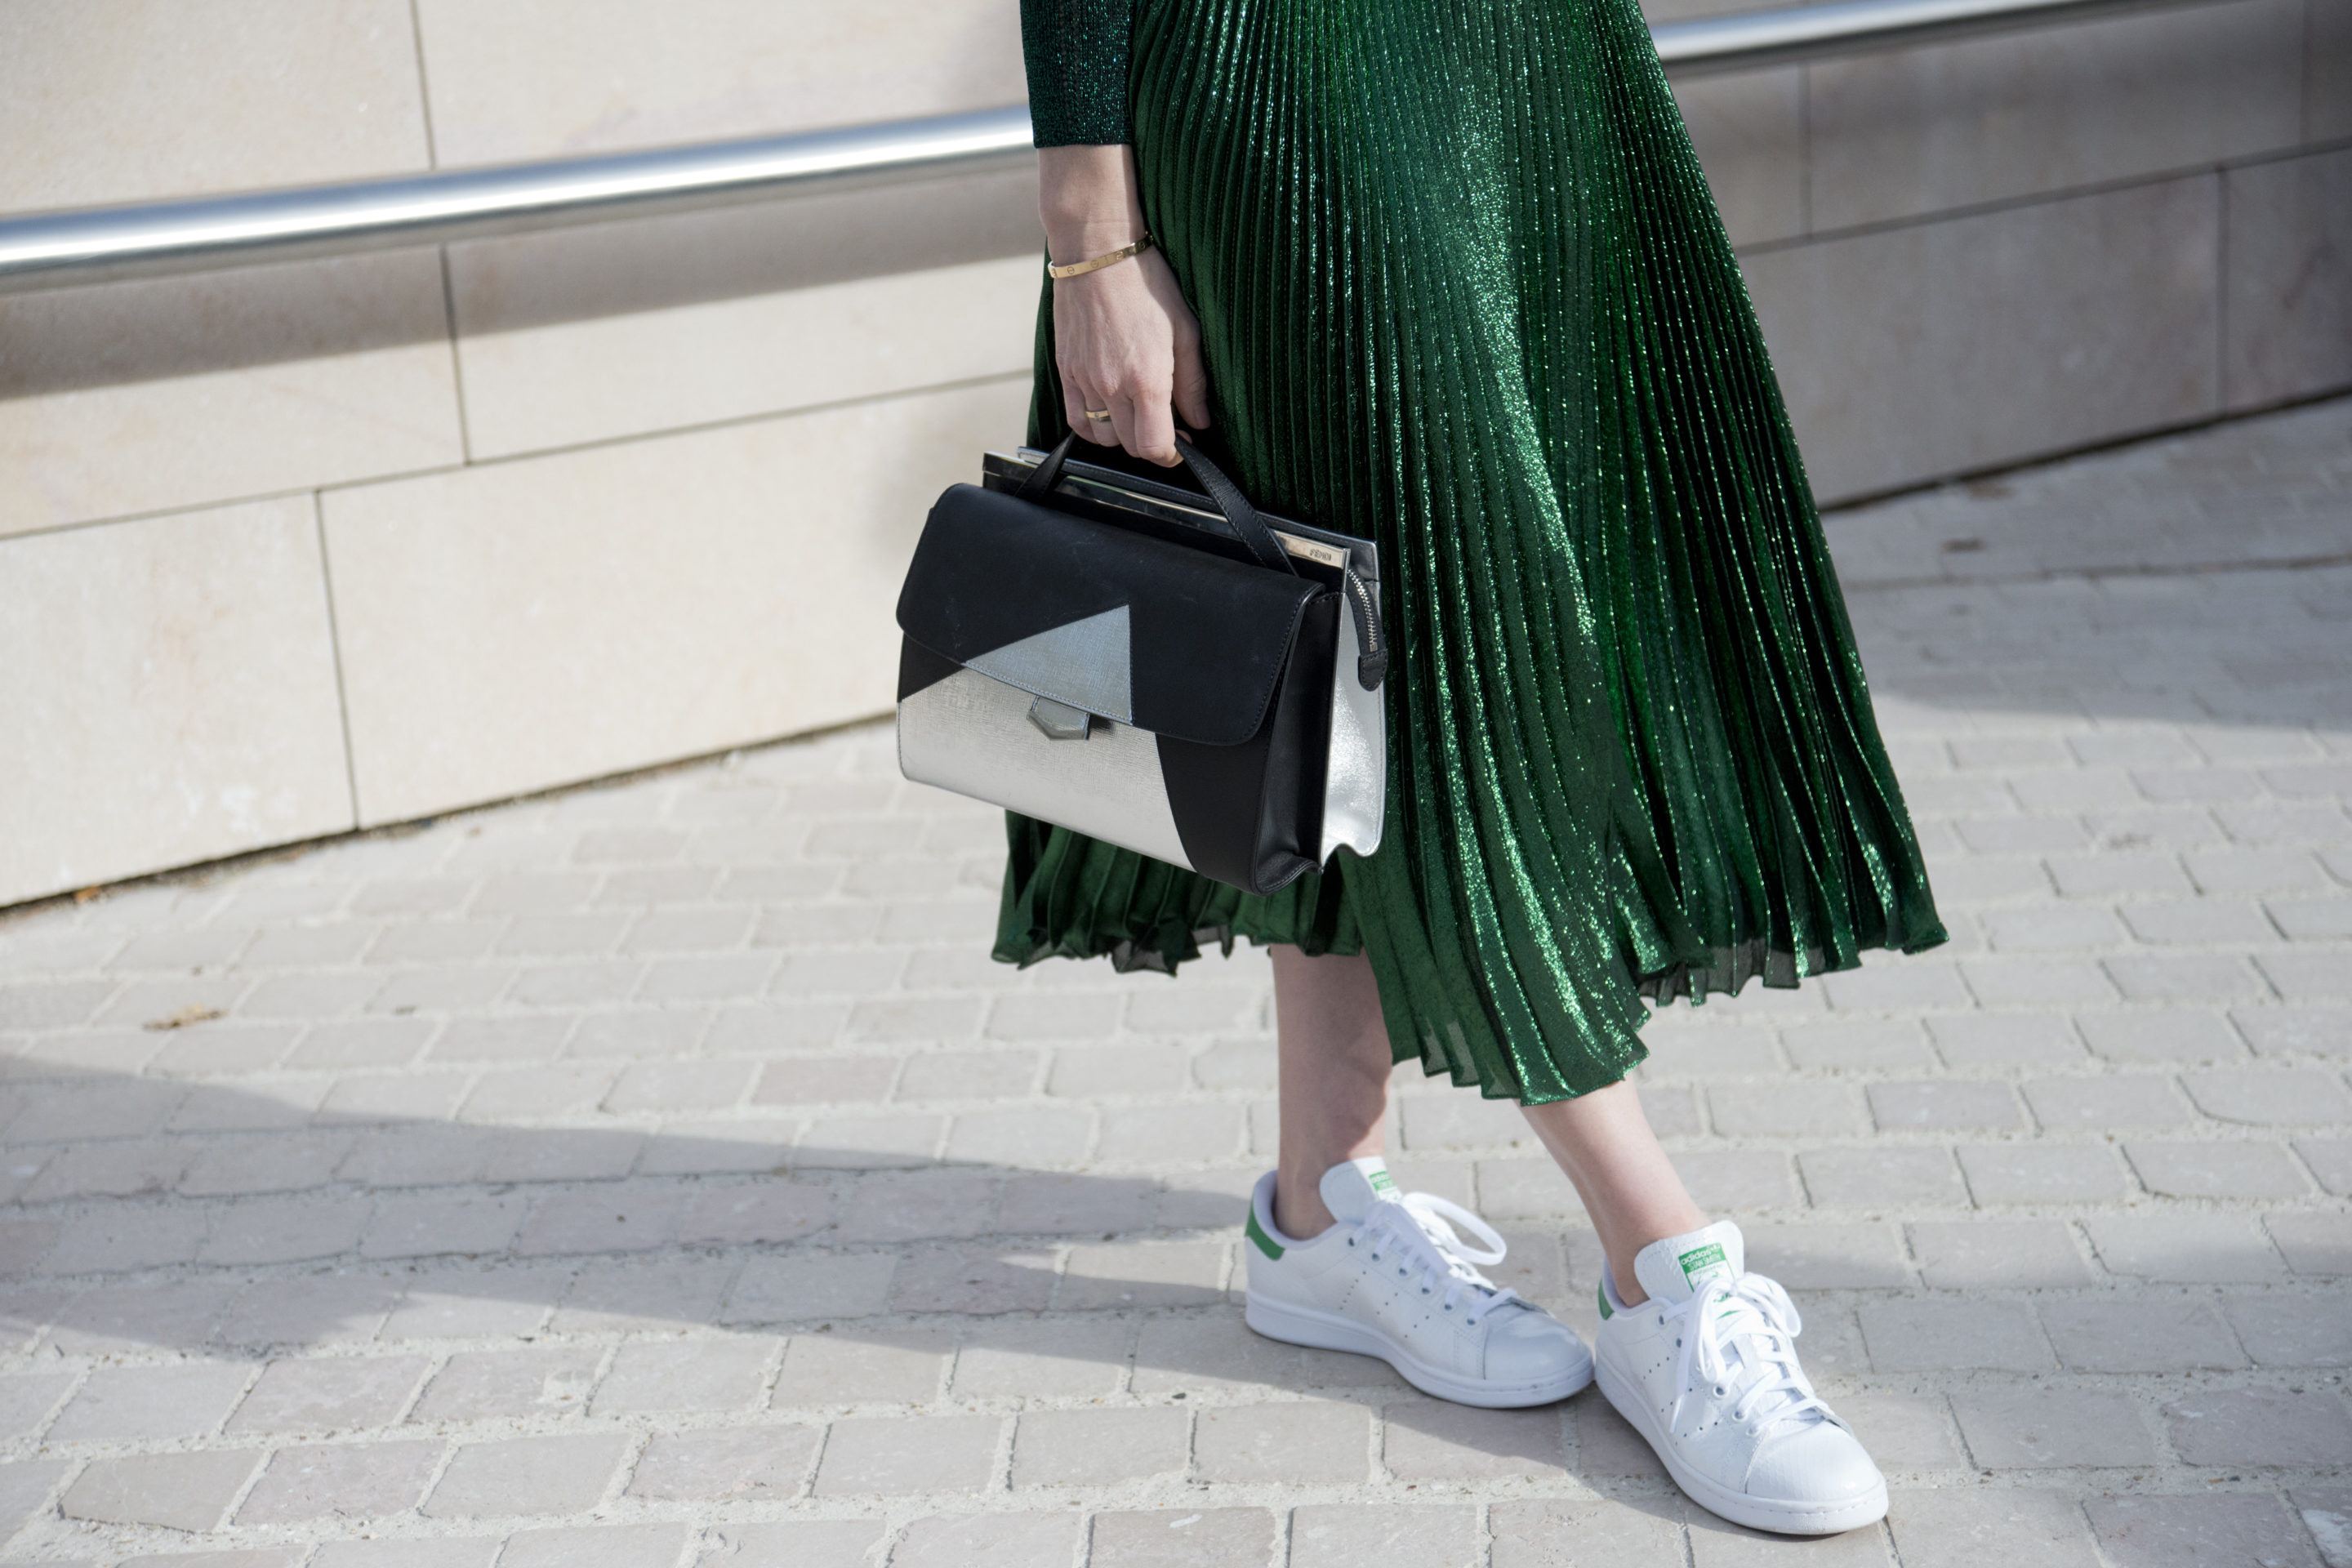 dresses worn with sneakers